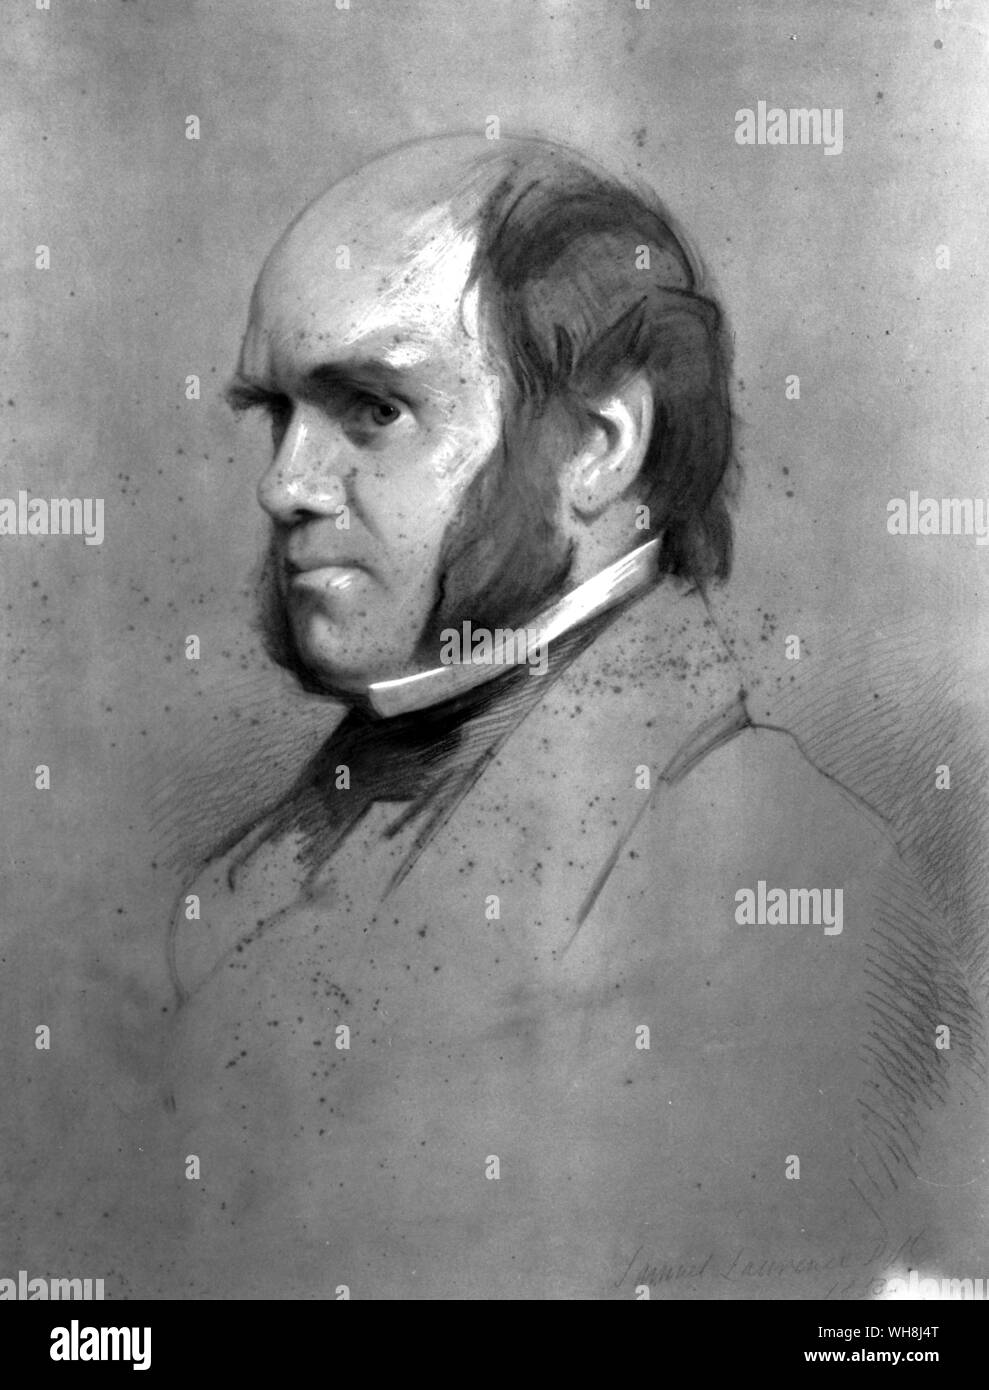 Charles Darwin in 1853. Chalk drawing by Samuel lawrence (1817-1884). From Darwin and the Beagle by Alan Moorhead, page 246.. Charles Robert Darwin (1809 -1896) was a British naturalist who achieved lasting fame as the originator of the theory of evolution through natural selection. Darwin's five-year voyage on the Beagle brought him eminence as a geologist and fame as a popular author. His biological observations led him to study the transmutation of species and develop his theory of natural selection in 1838. His 1859 book, The Origin of Species by Means of Natural Selection, or The Stock Photo